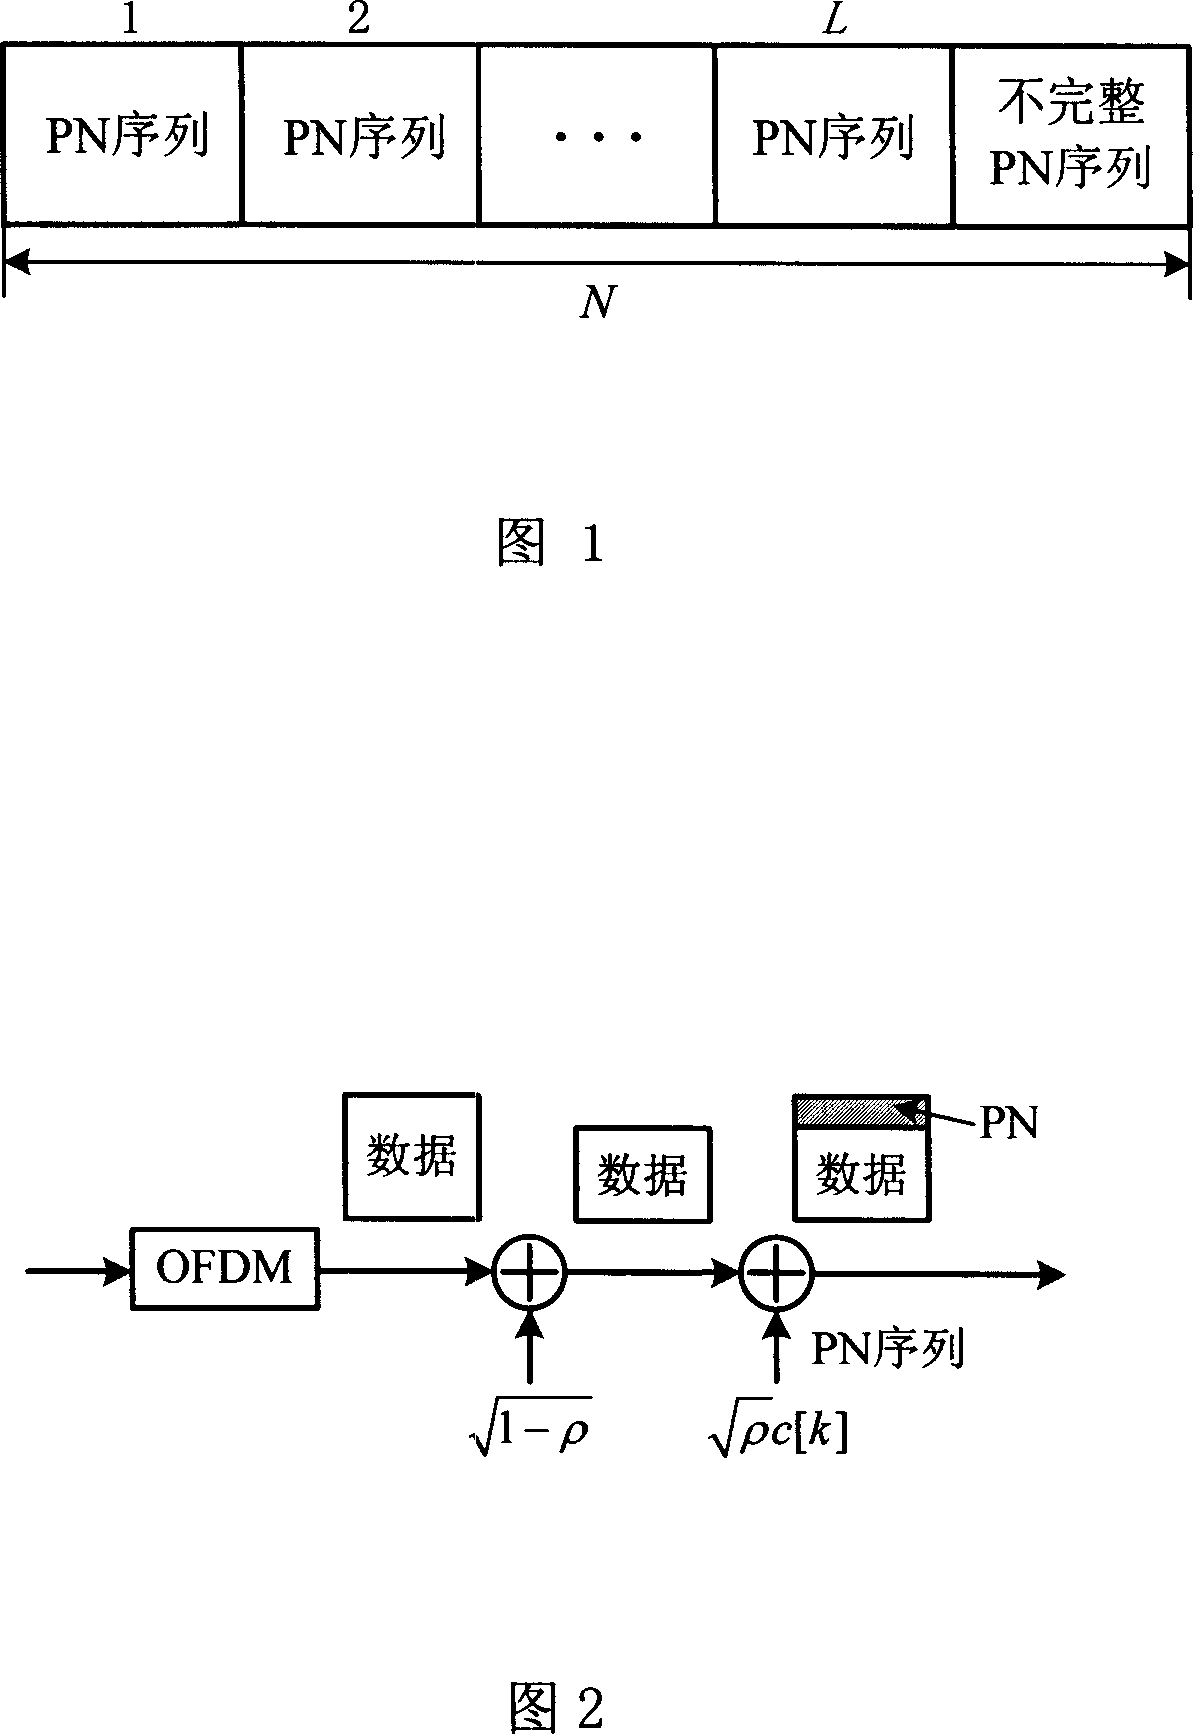 Method and system for synchronizing time and frequency in orthogonal frequency division multiplex communication